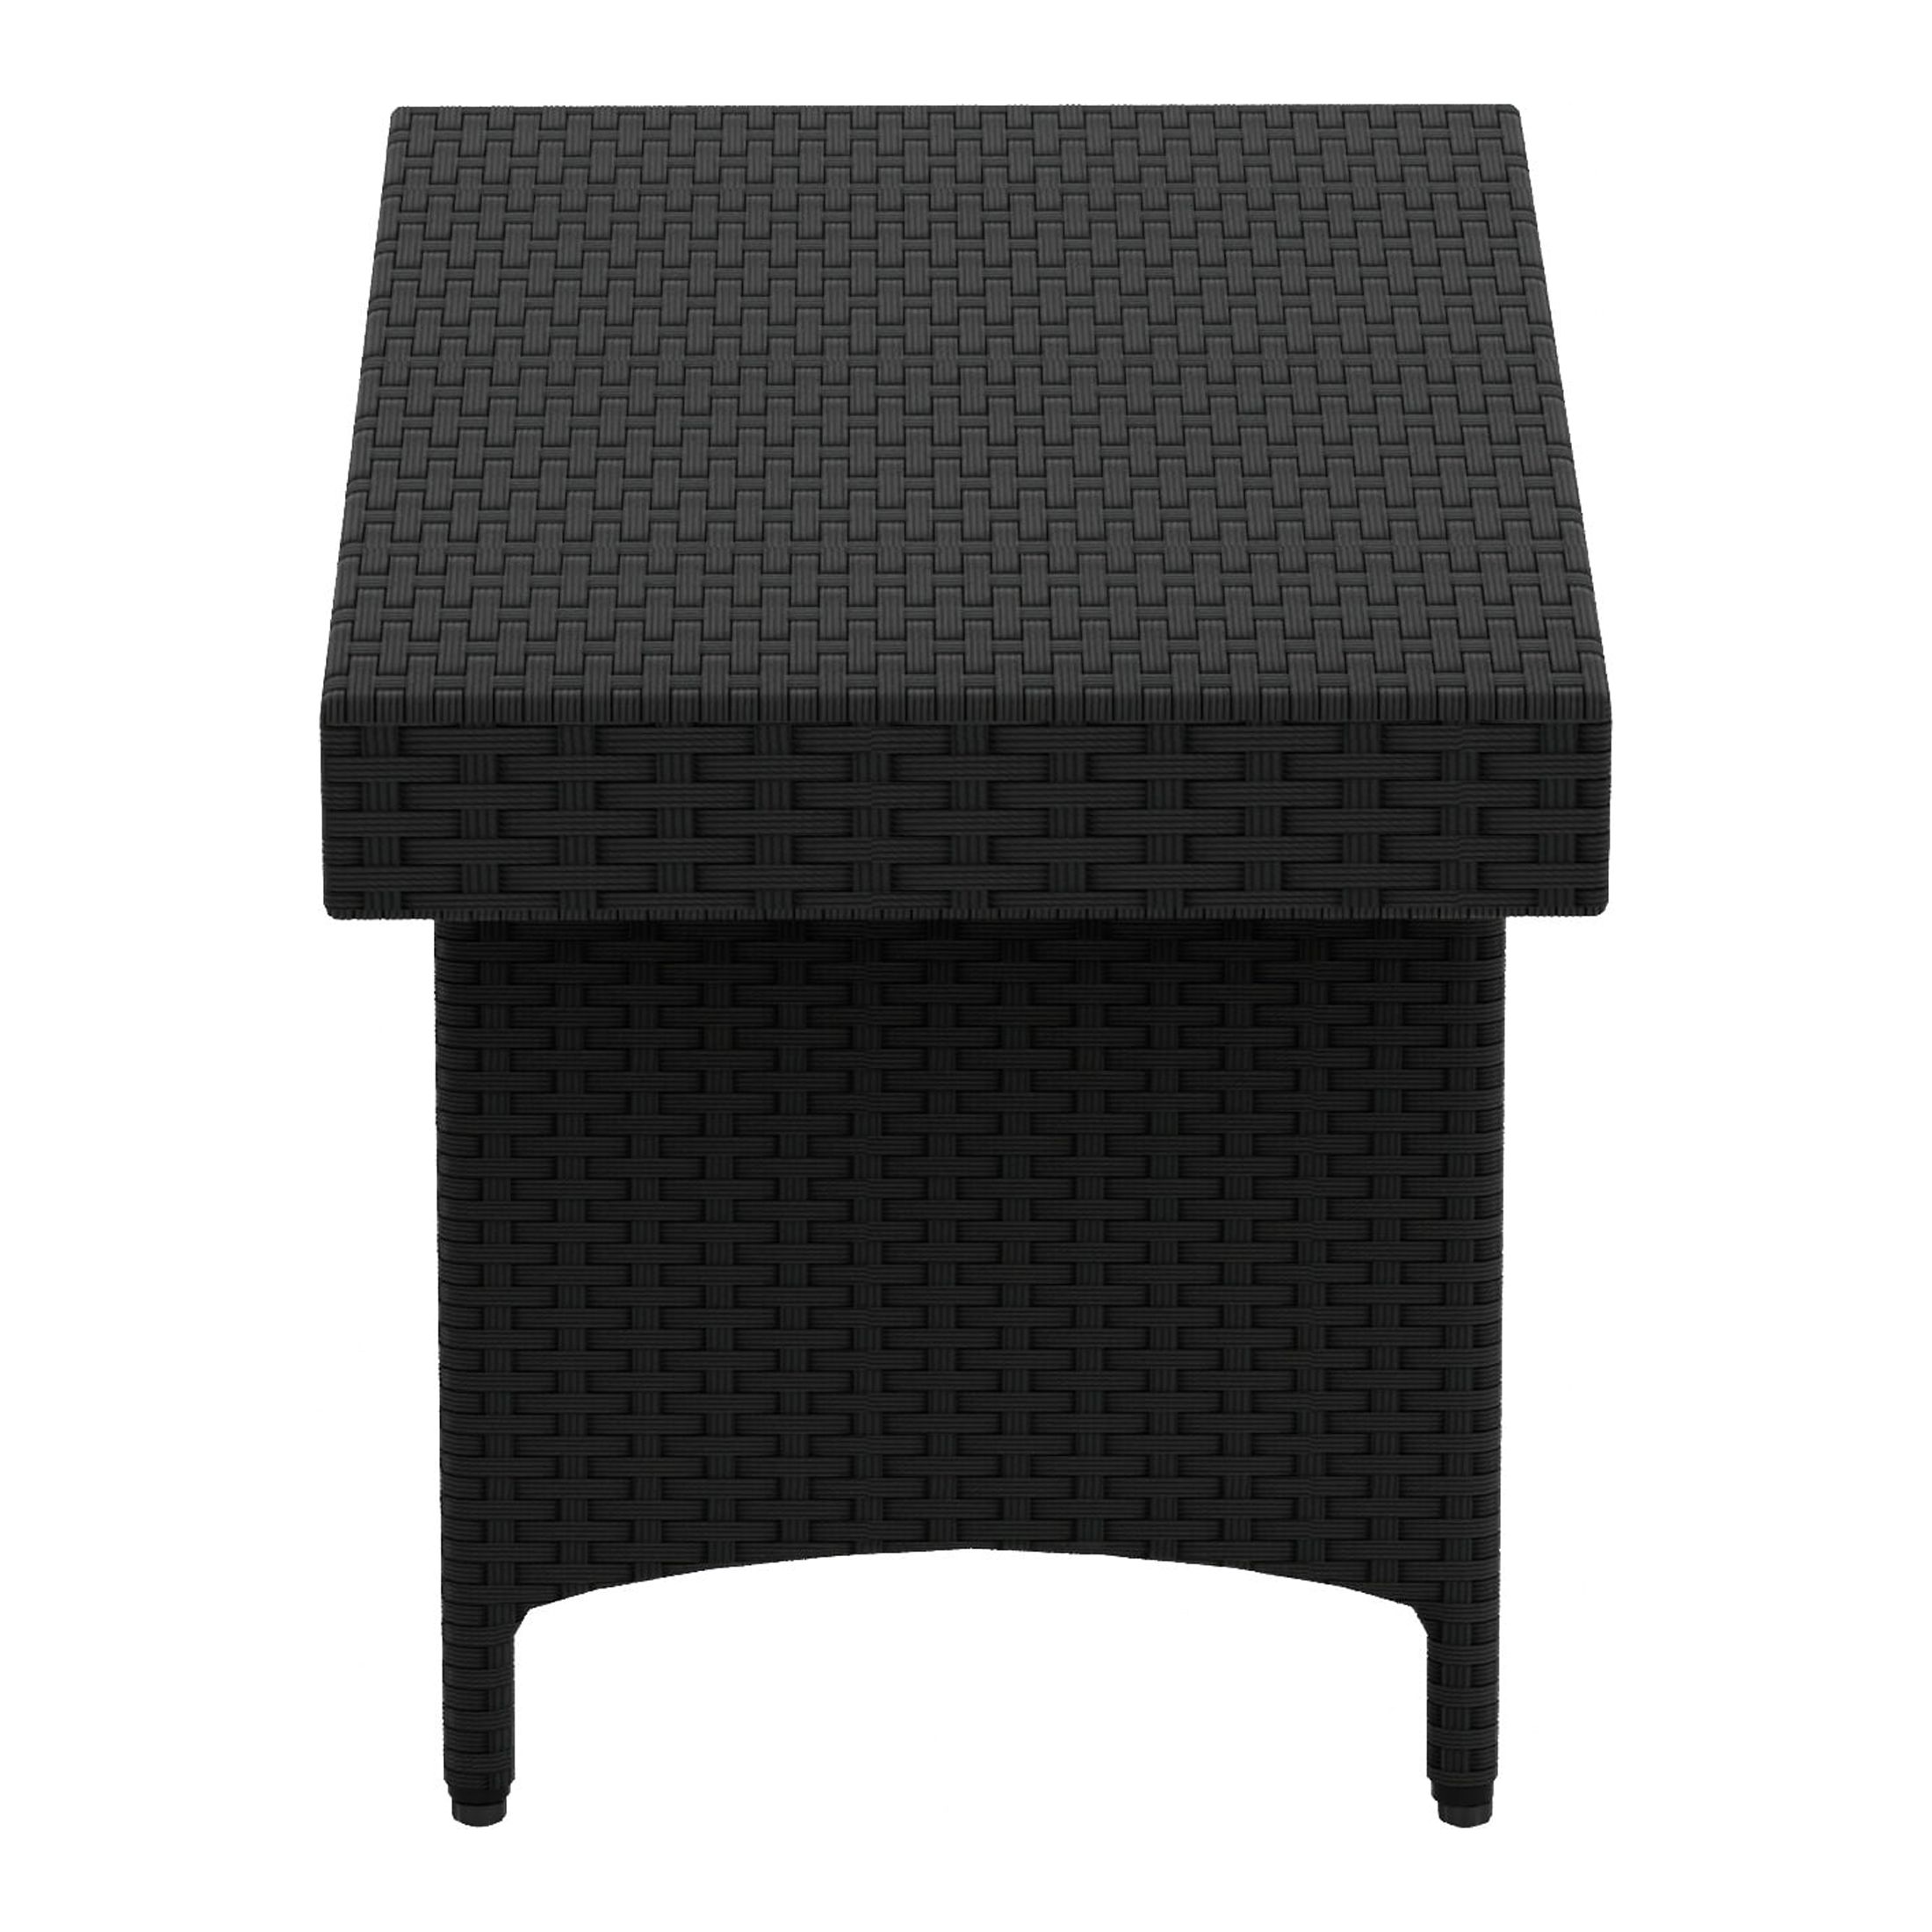 WestinTrends Coastal Outdoor Folding Side Table, 23" x 15" All Weather PE Rattan Wicker Small Patio Table Portable Picnic Table, Black - image 5 of 7